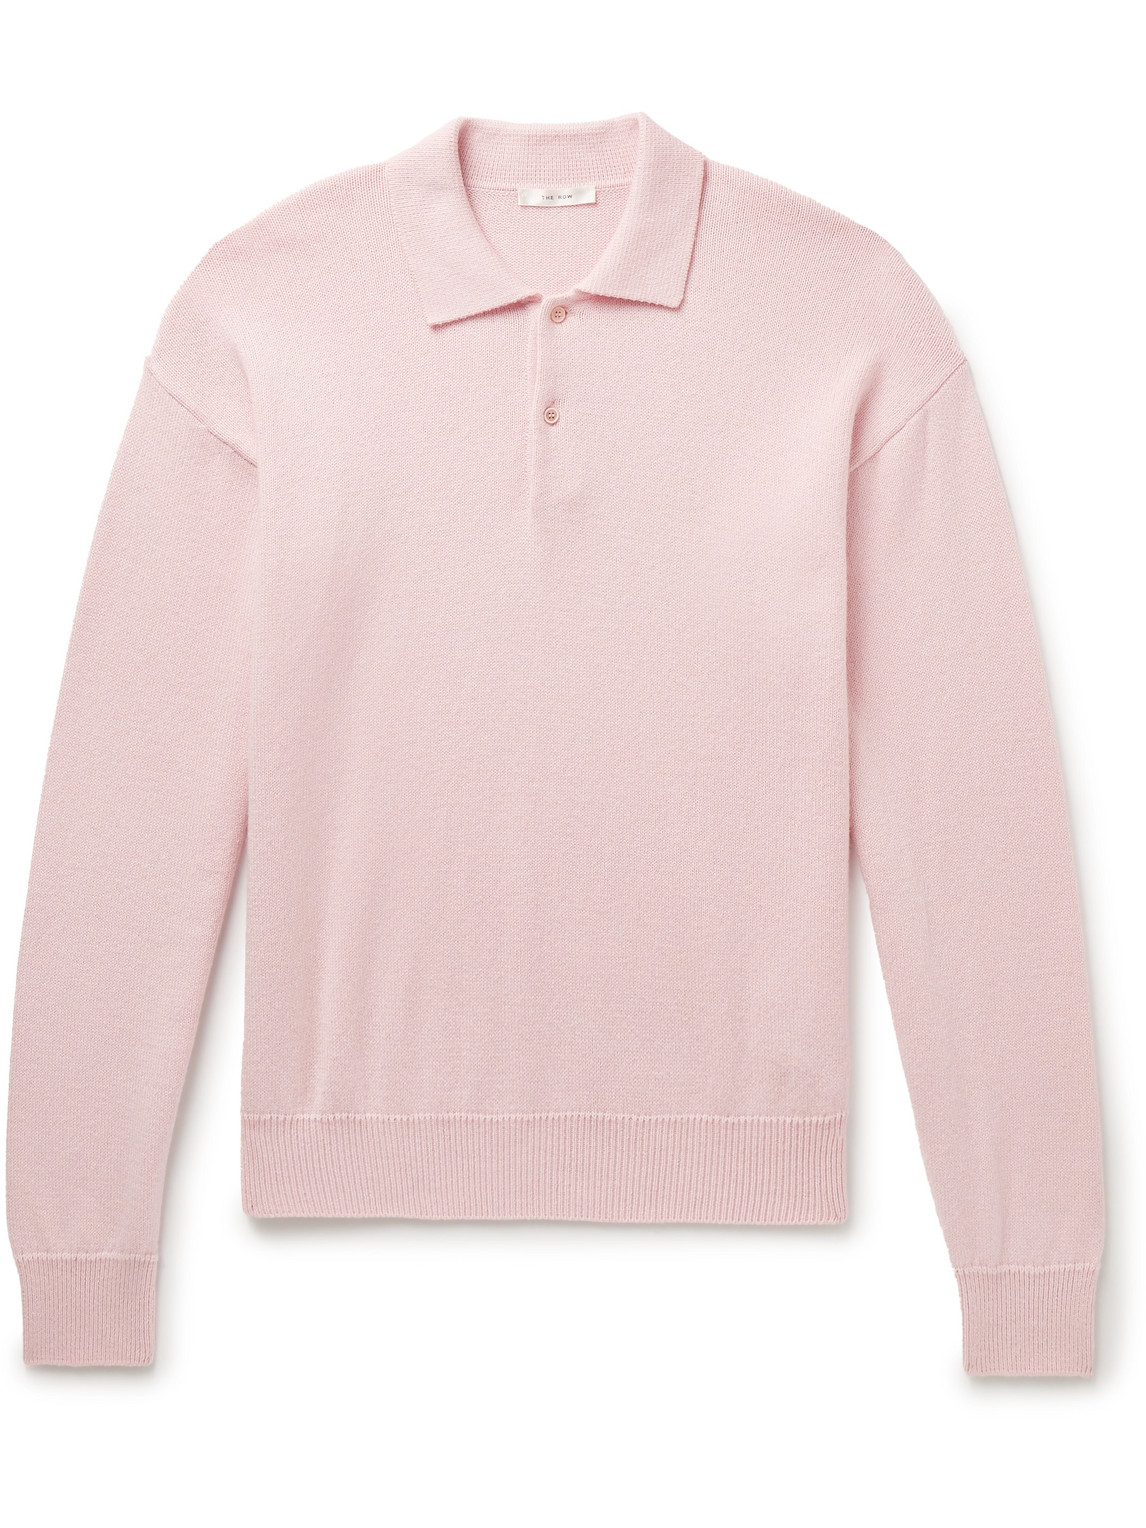 The Row - Joyce Cotton and Cashmere-Blend Polo Shirt - Men - Pink - S von The Row